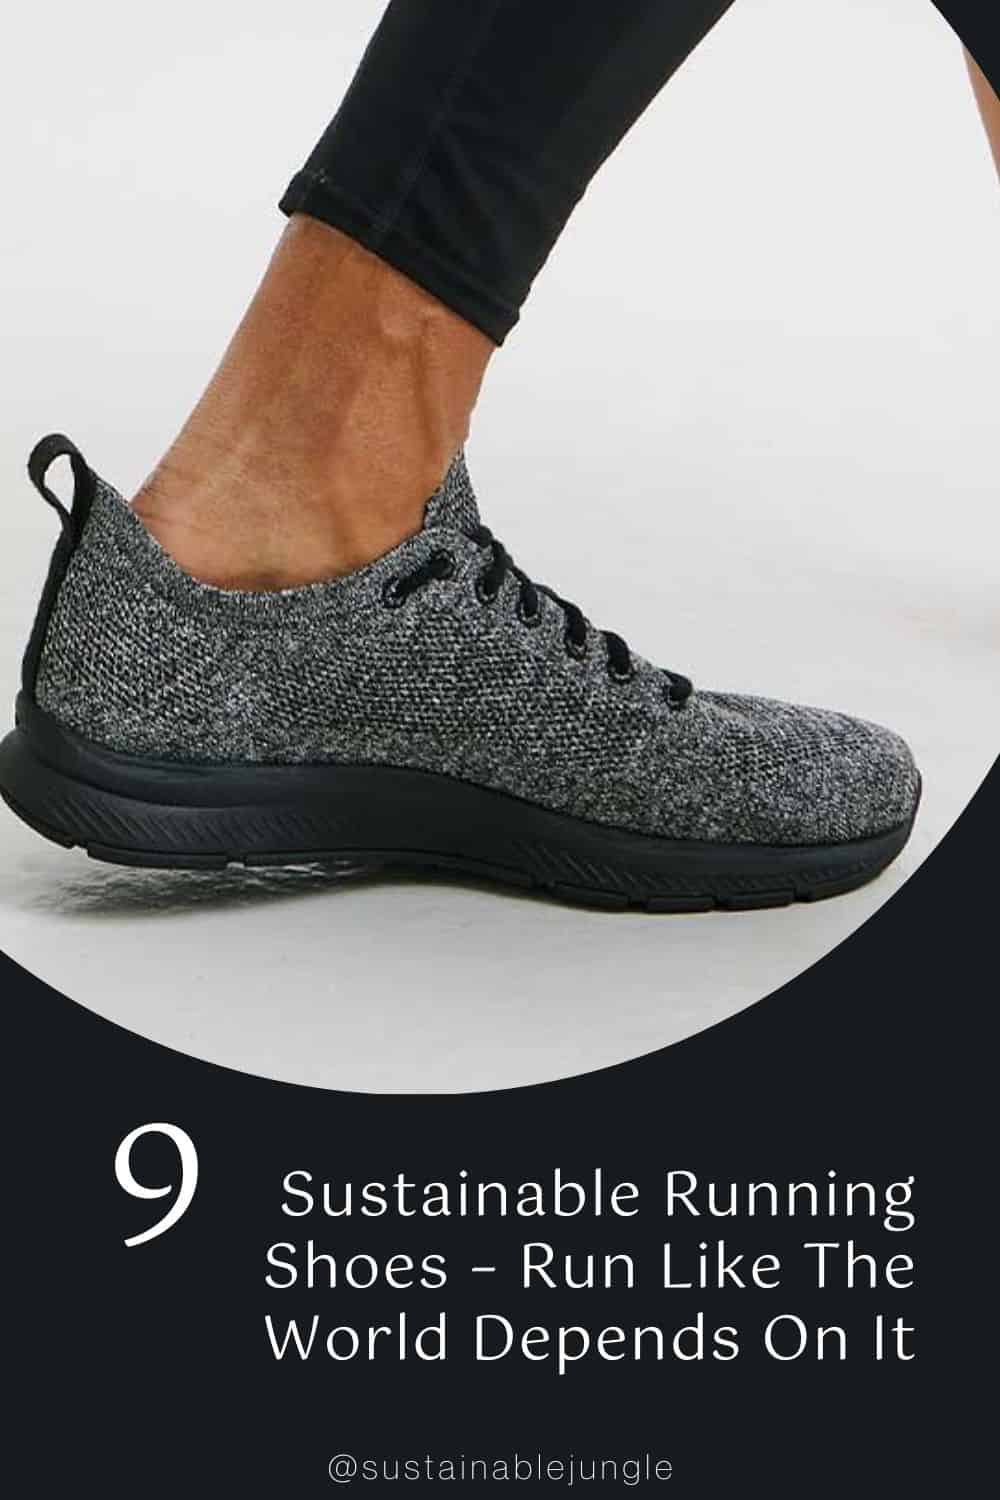 9 Sustainable Running Shoes – Run Like The World Depends On It Image by Hylo Athletics #sustainablerunningshoes #runningshoessustainable #bestsustainablerunningshoes #recycledrunningshoes #recycledplasticrunningshoes #sustainabletrailrunningshoes #sustainablejungle